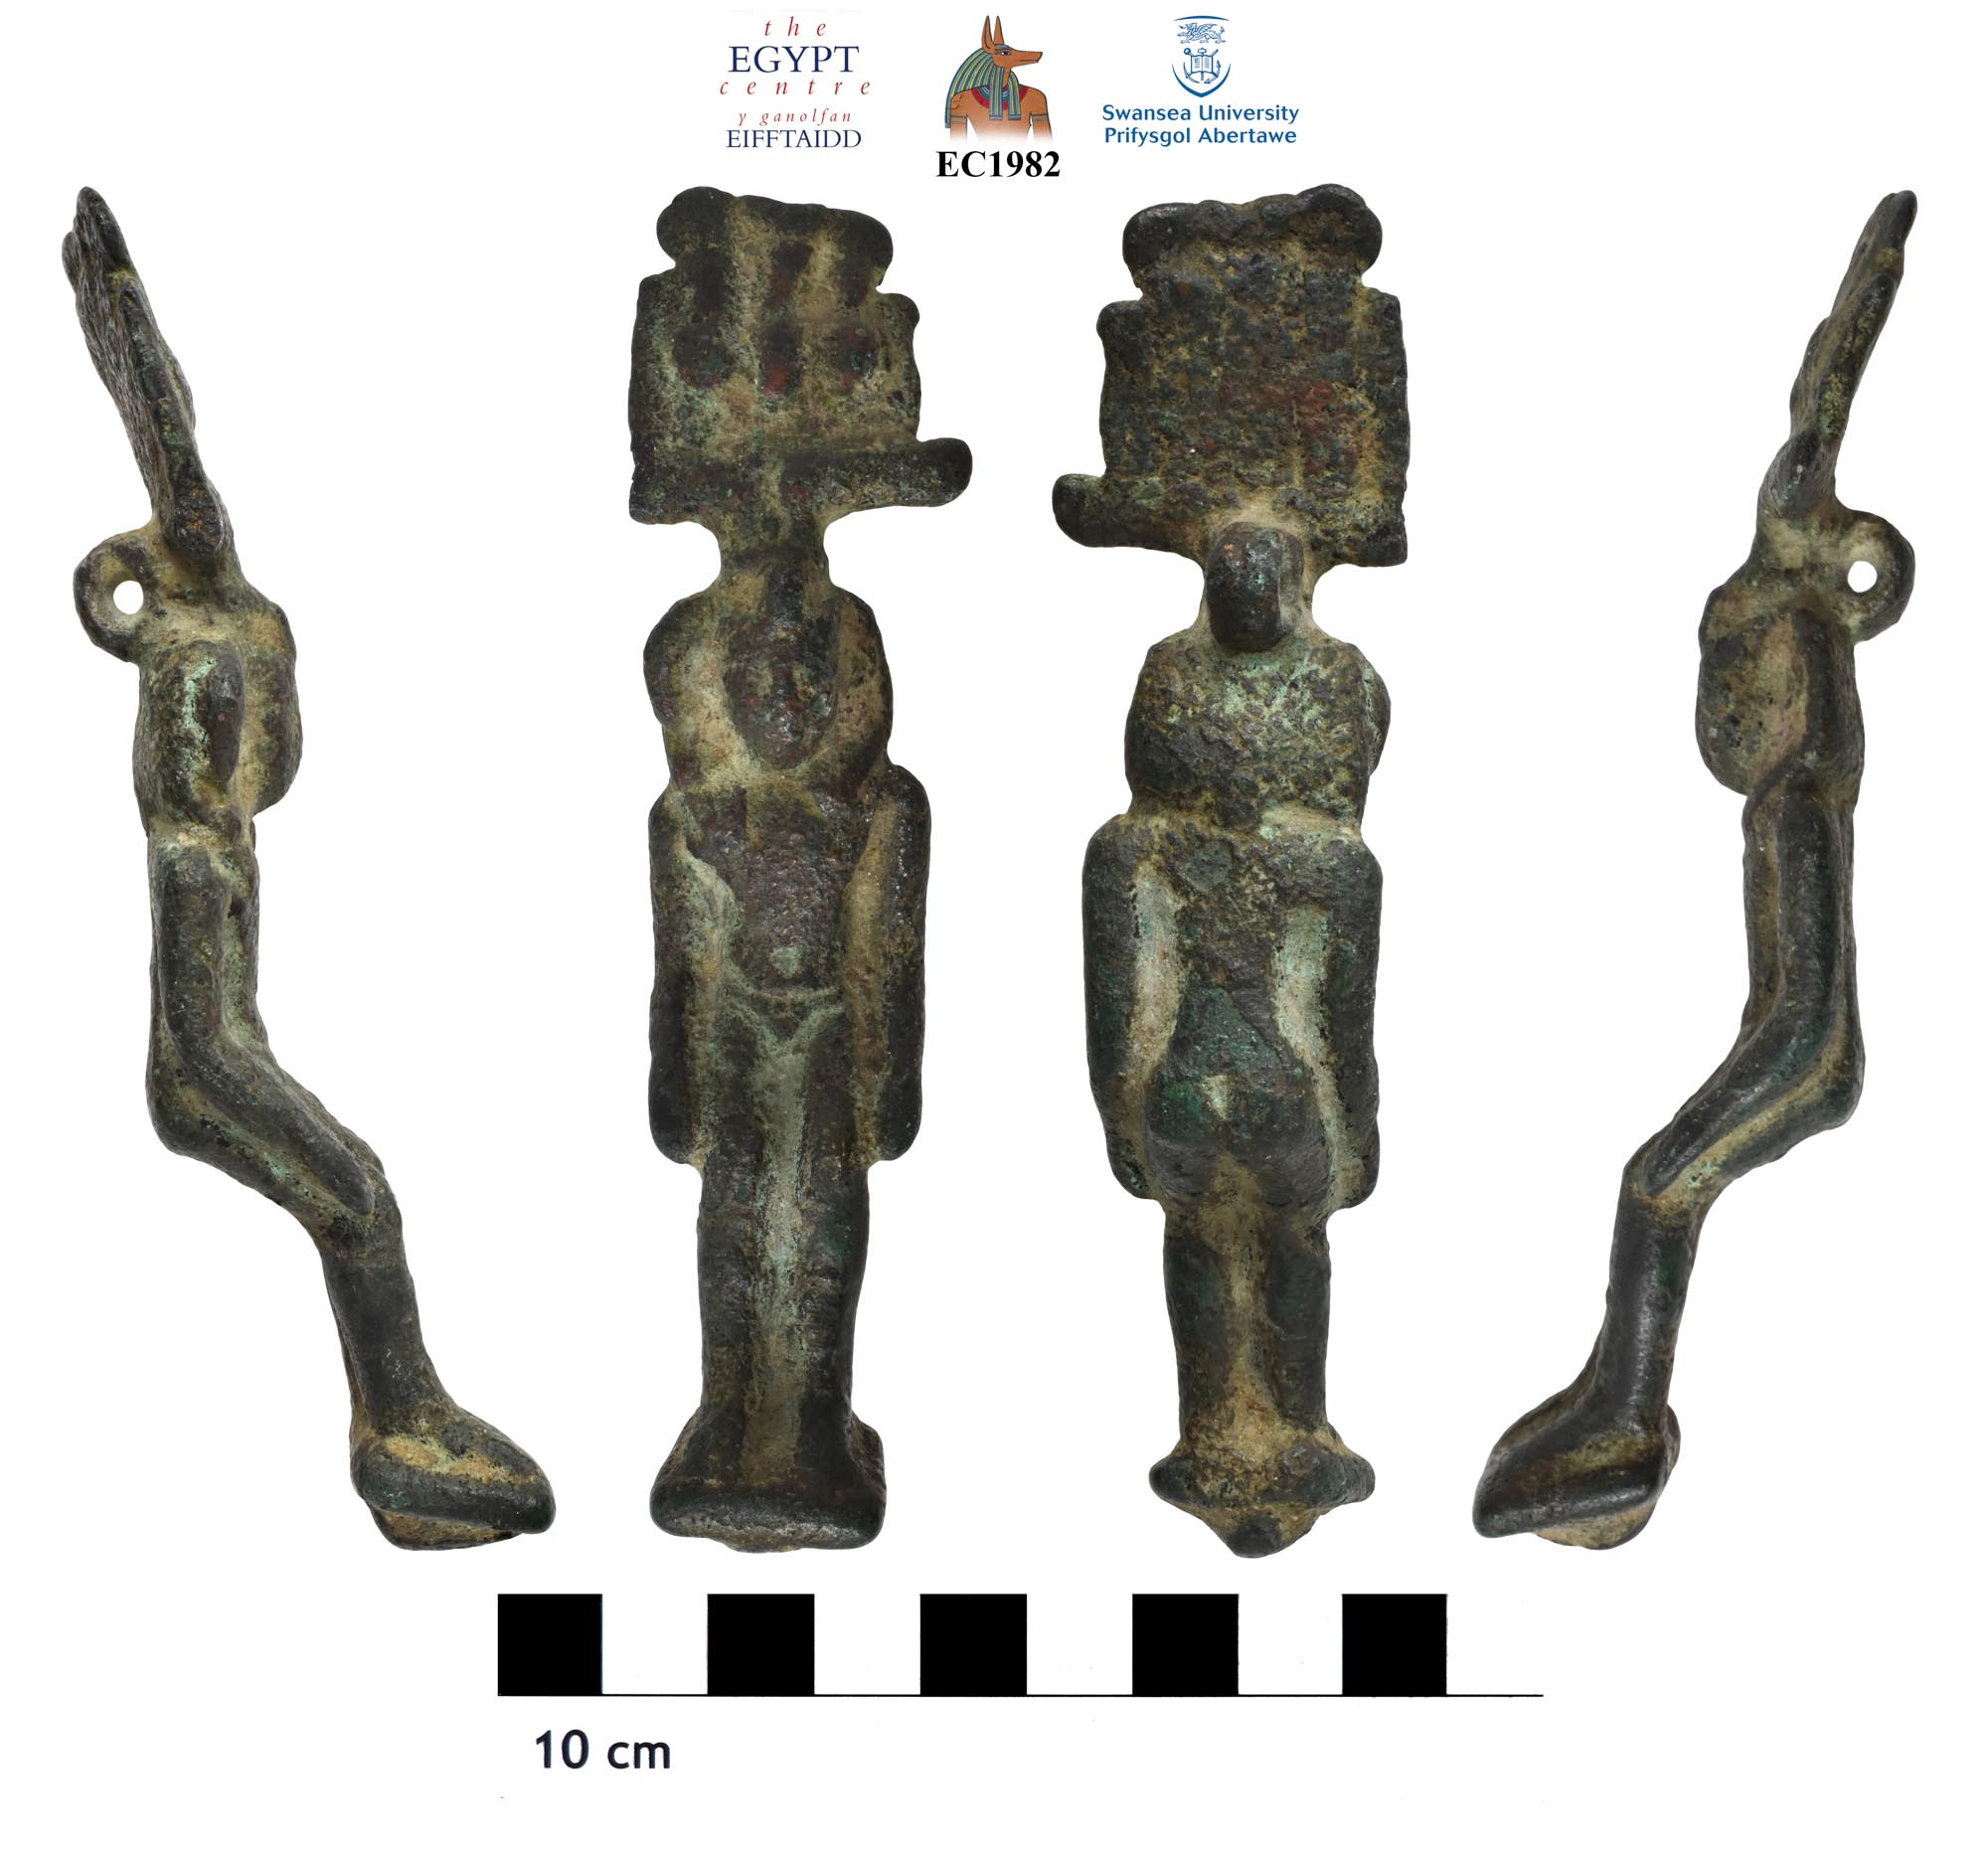 Image for: Harpakhered figure